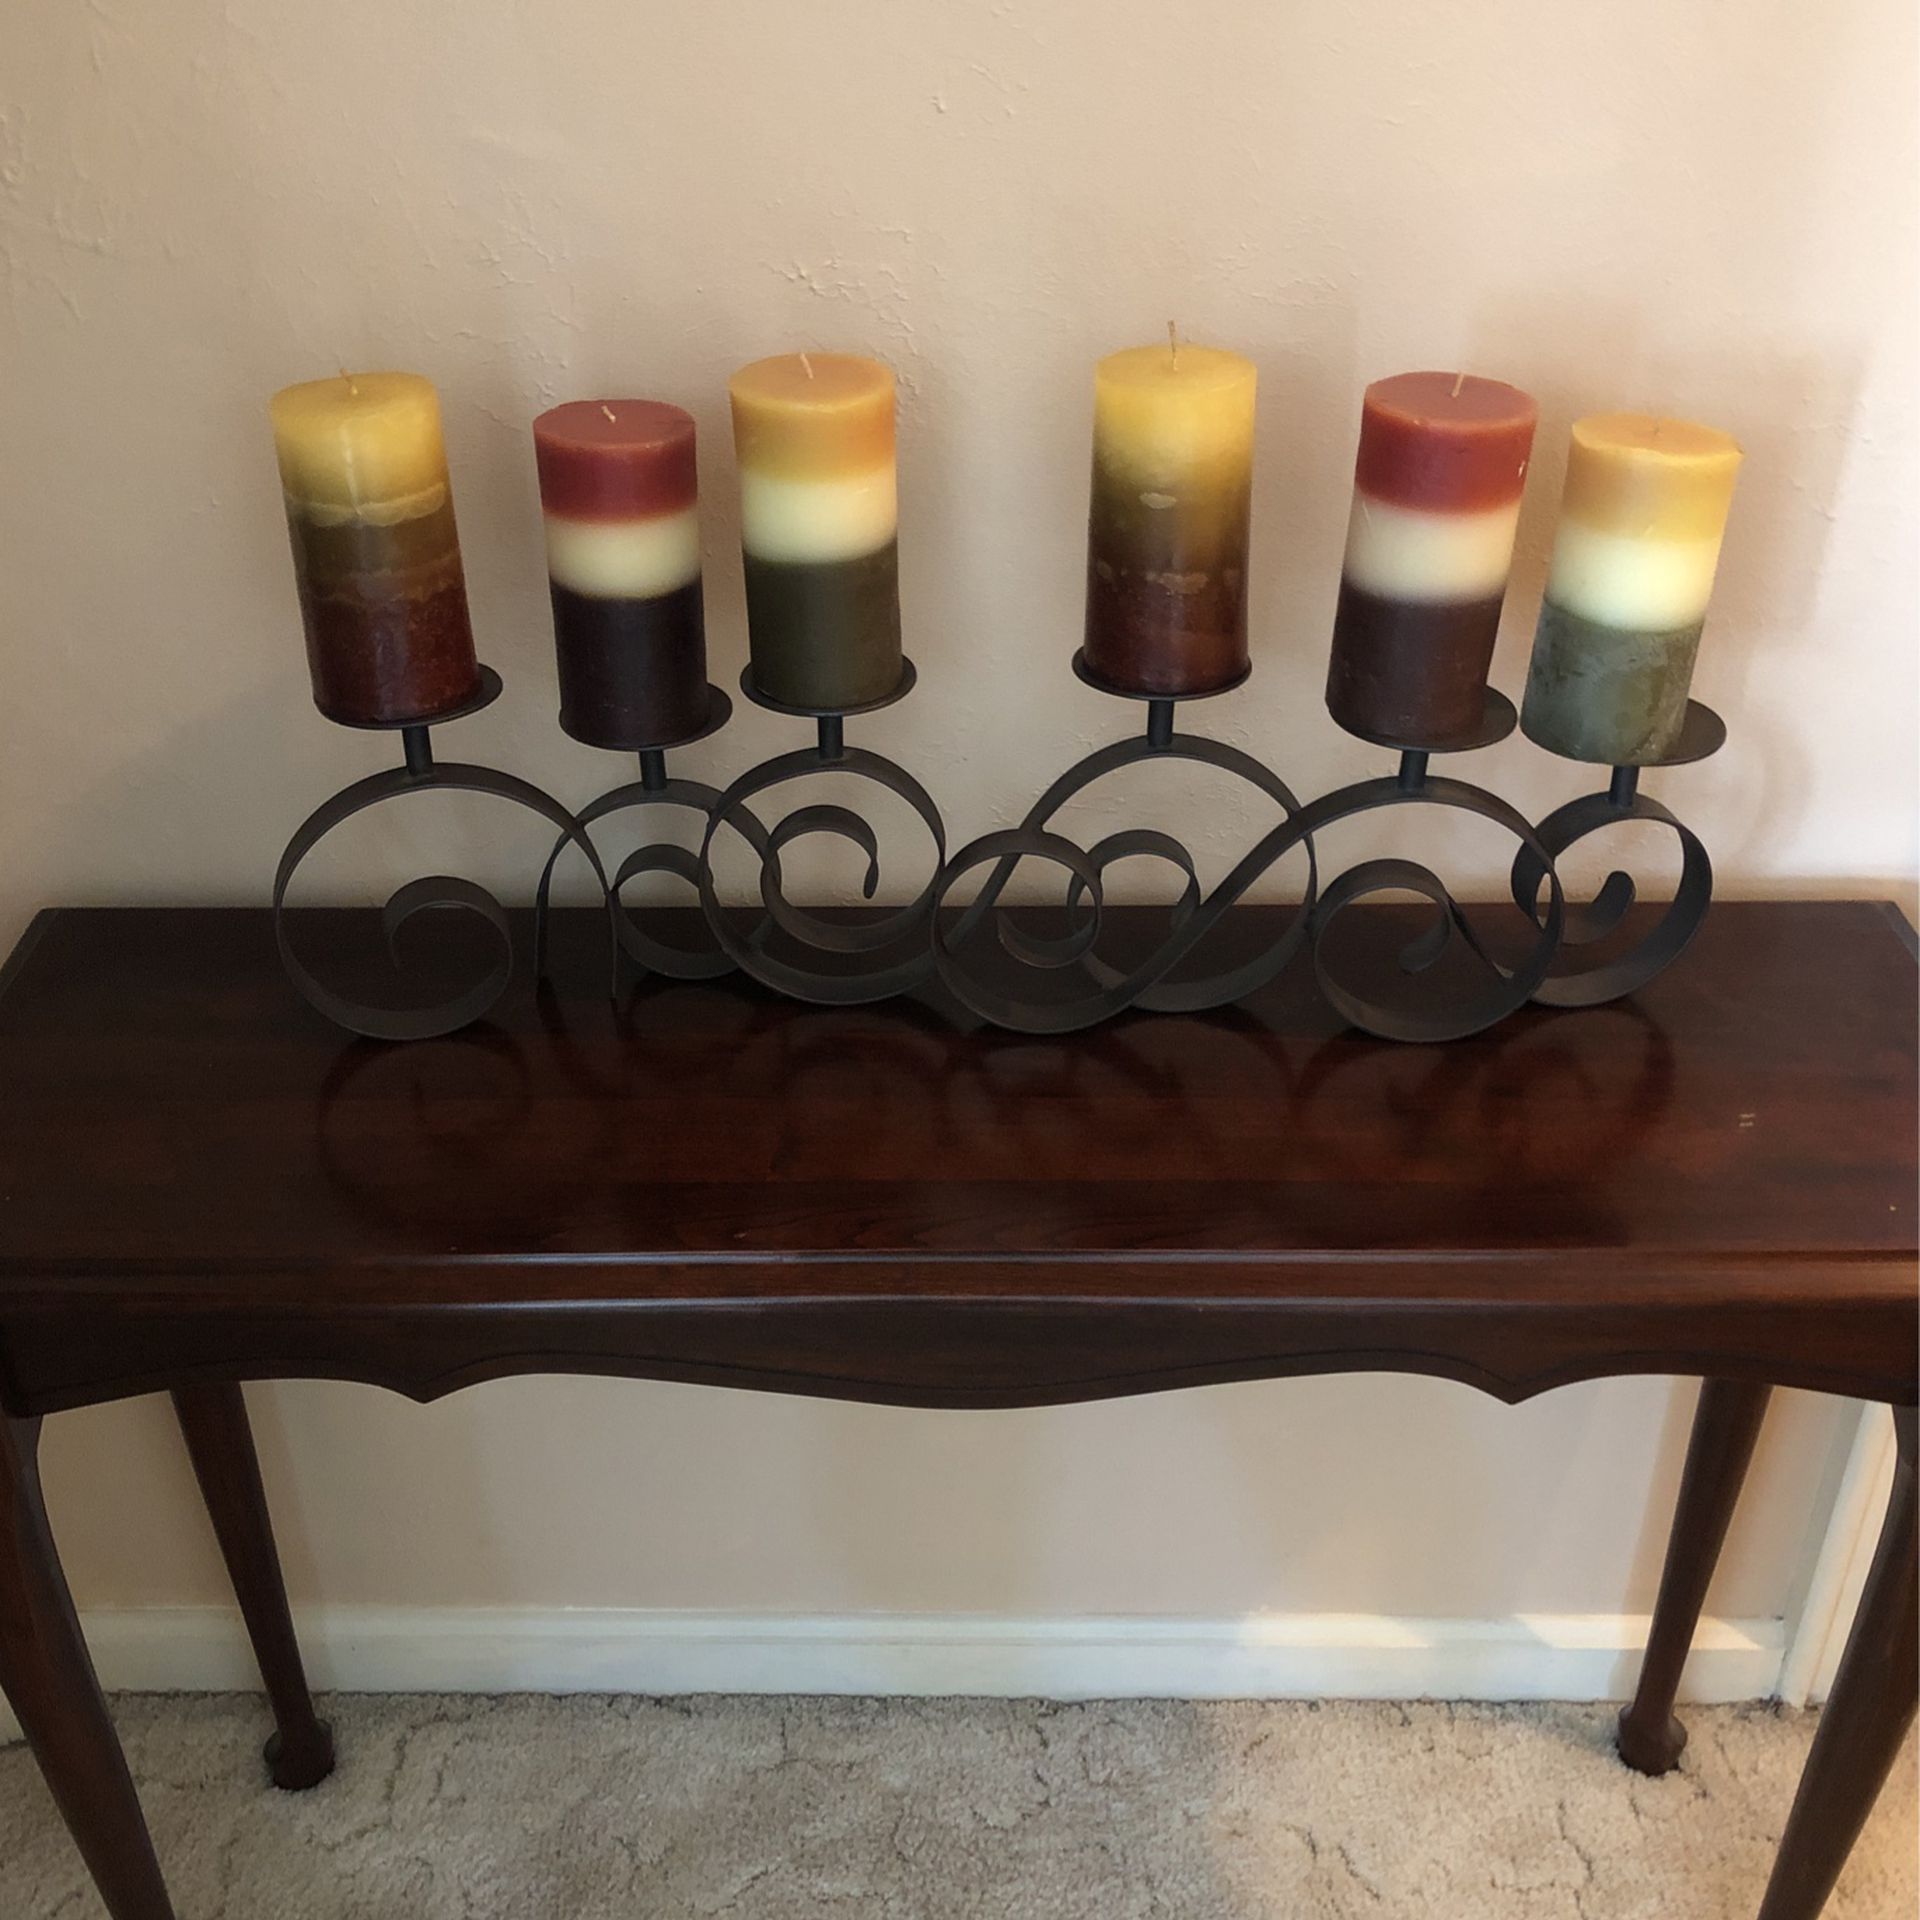 Entry Table  Wood  $35